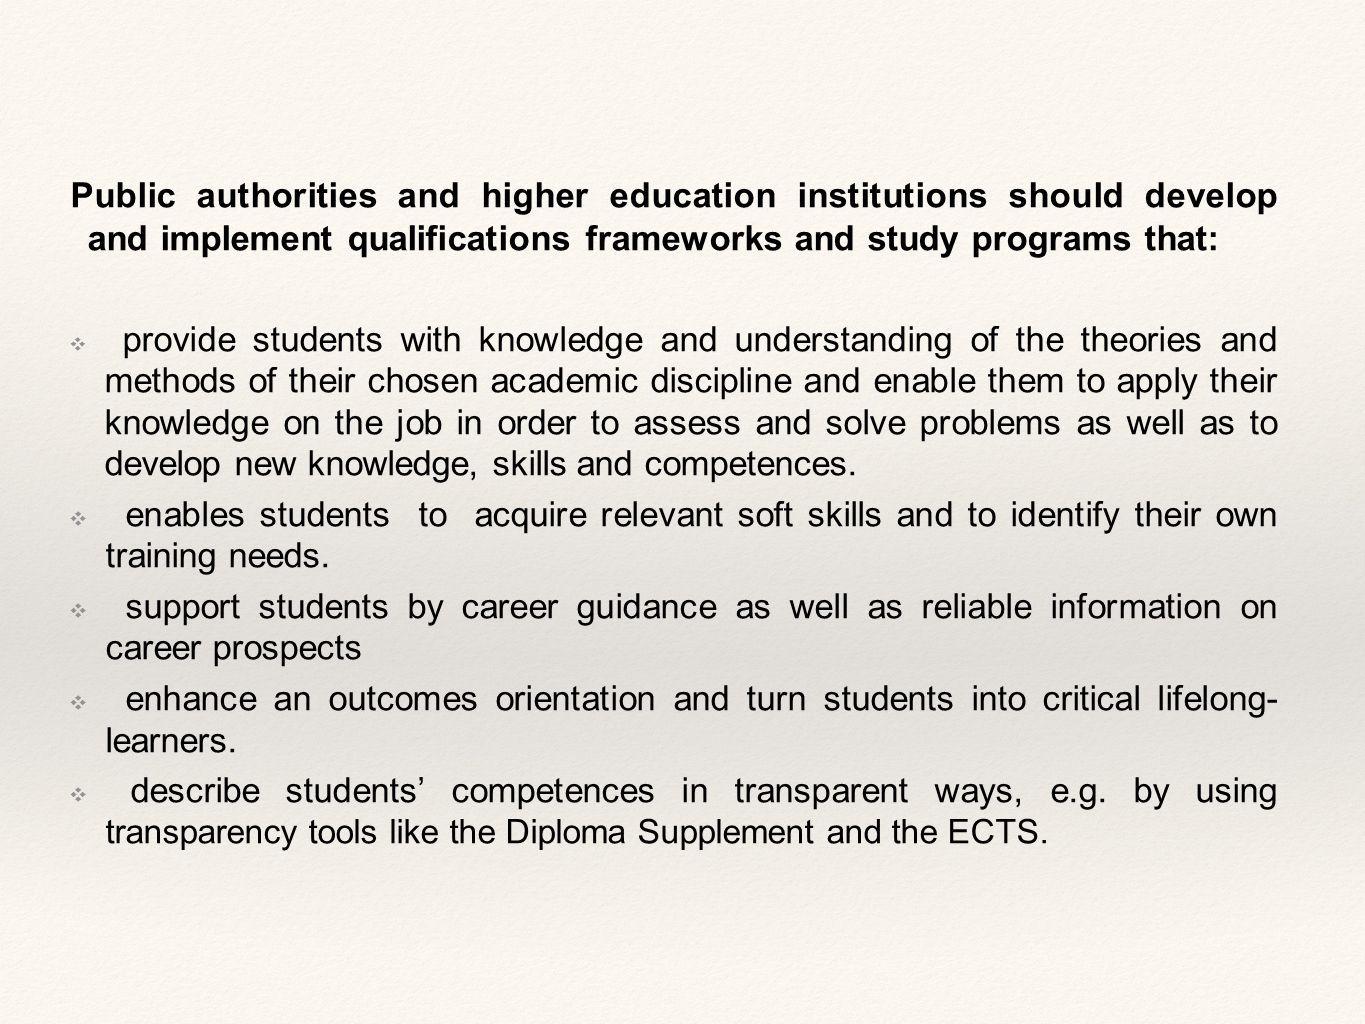 Public authorities and higher education institutions should develop and implement qualifications frameworks and study programs that: ❖ provide students with knowledge and understanding of the theories and methods of their chosen academic discipline and enable them to apply their knowledge on the job in order to assess and solve problems as well as to develop new knowledge, skills and competences.